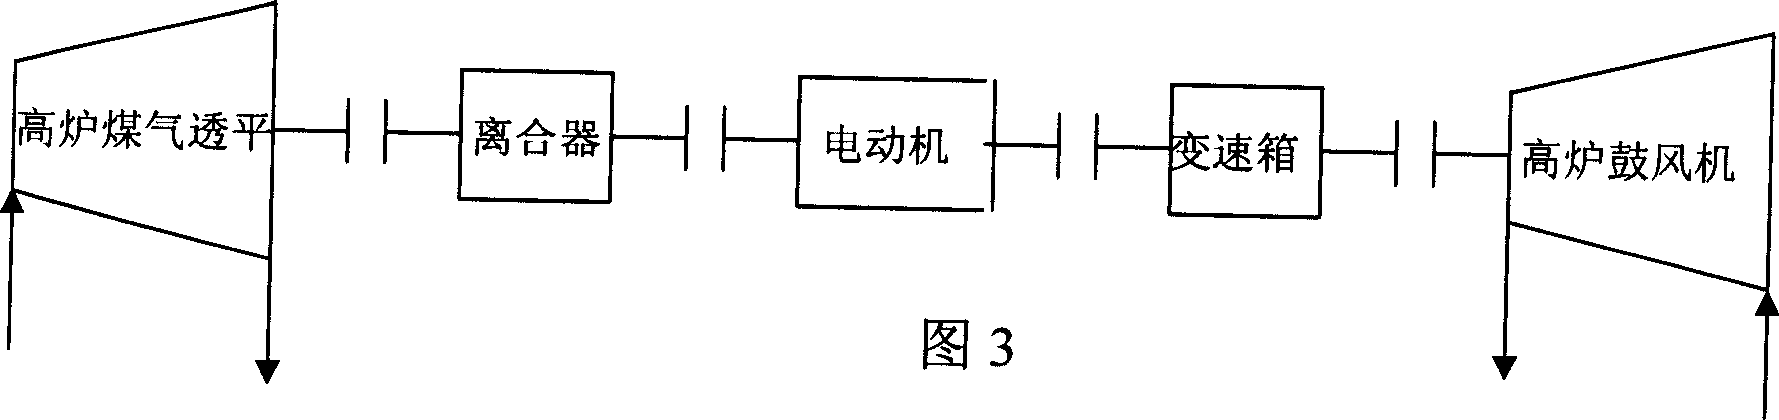 Blowing energy recovering method for blast furnace